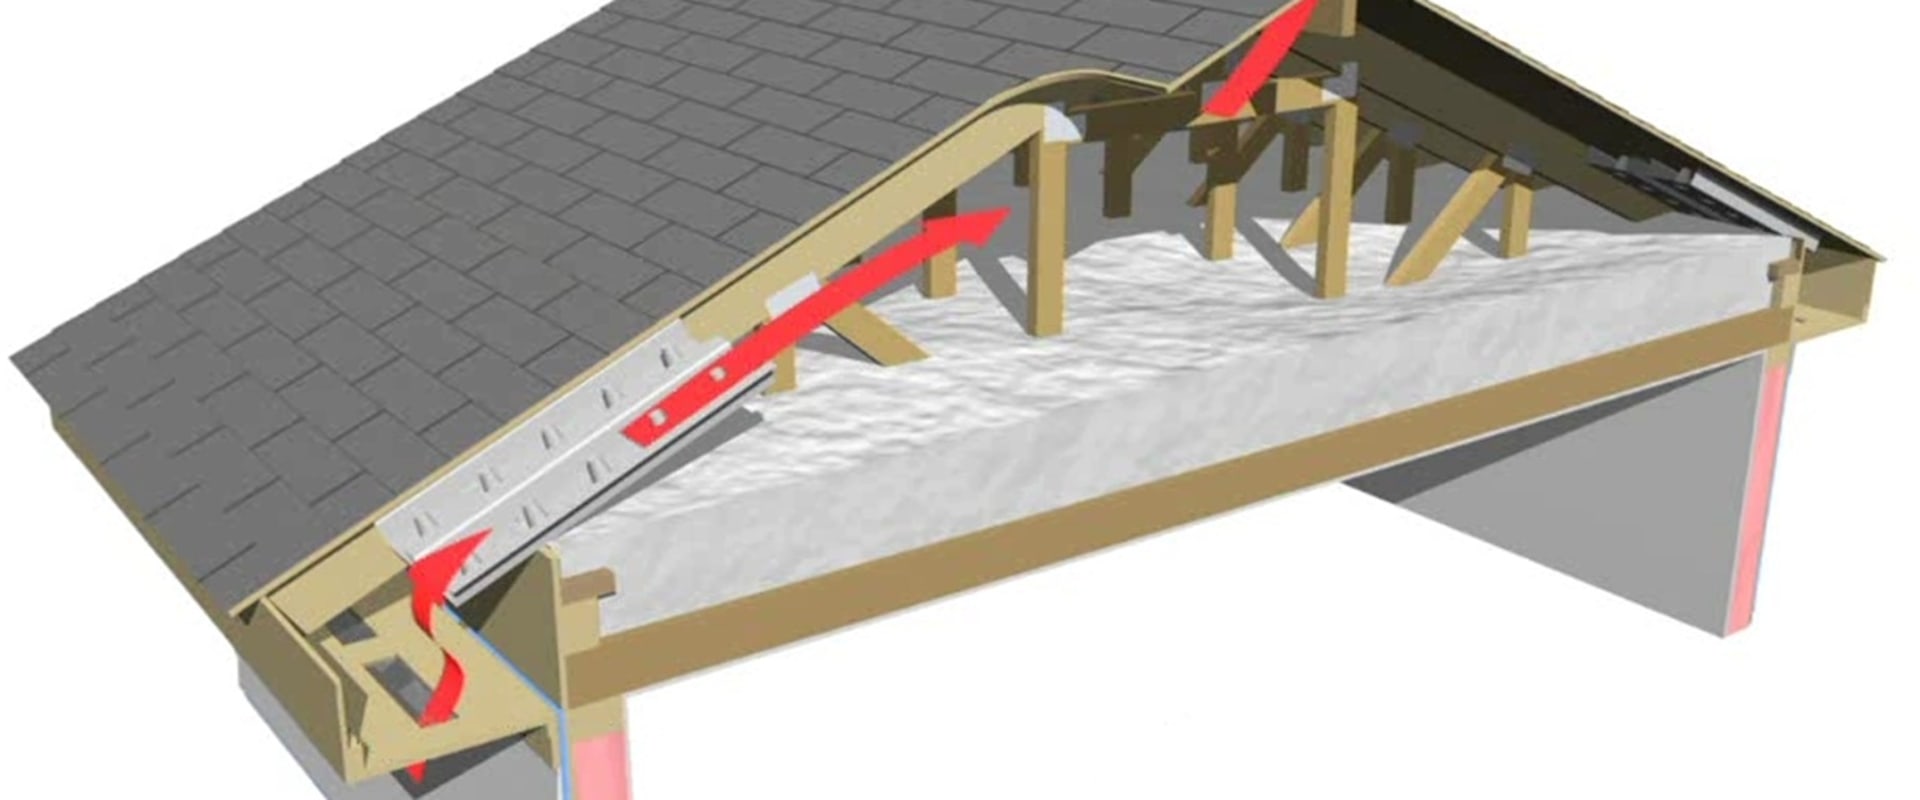 Attic Ventilation Solutions: The Key to a Healthy Roof